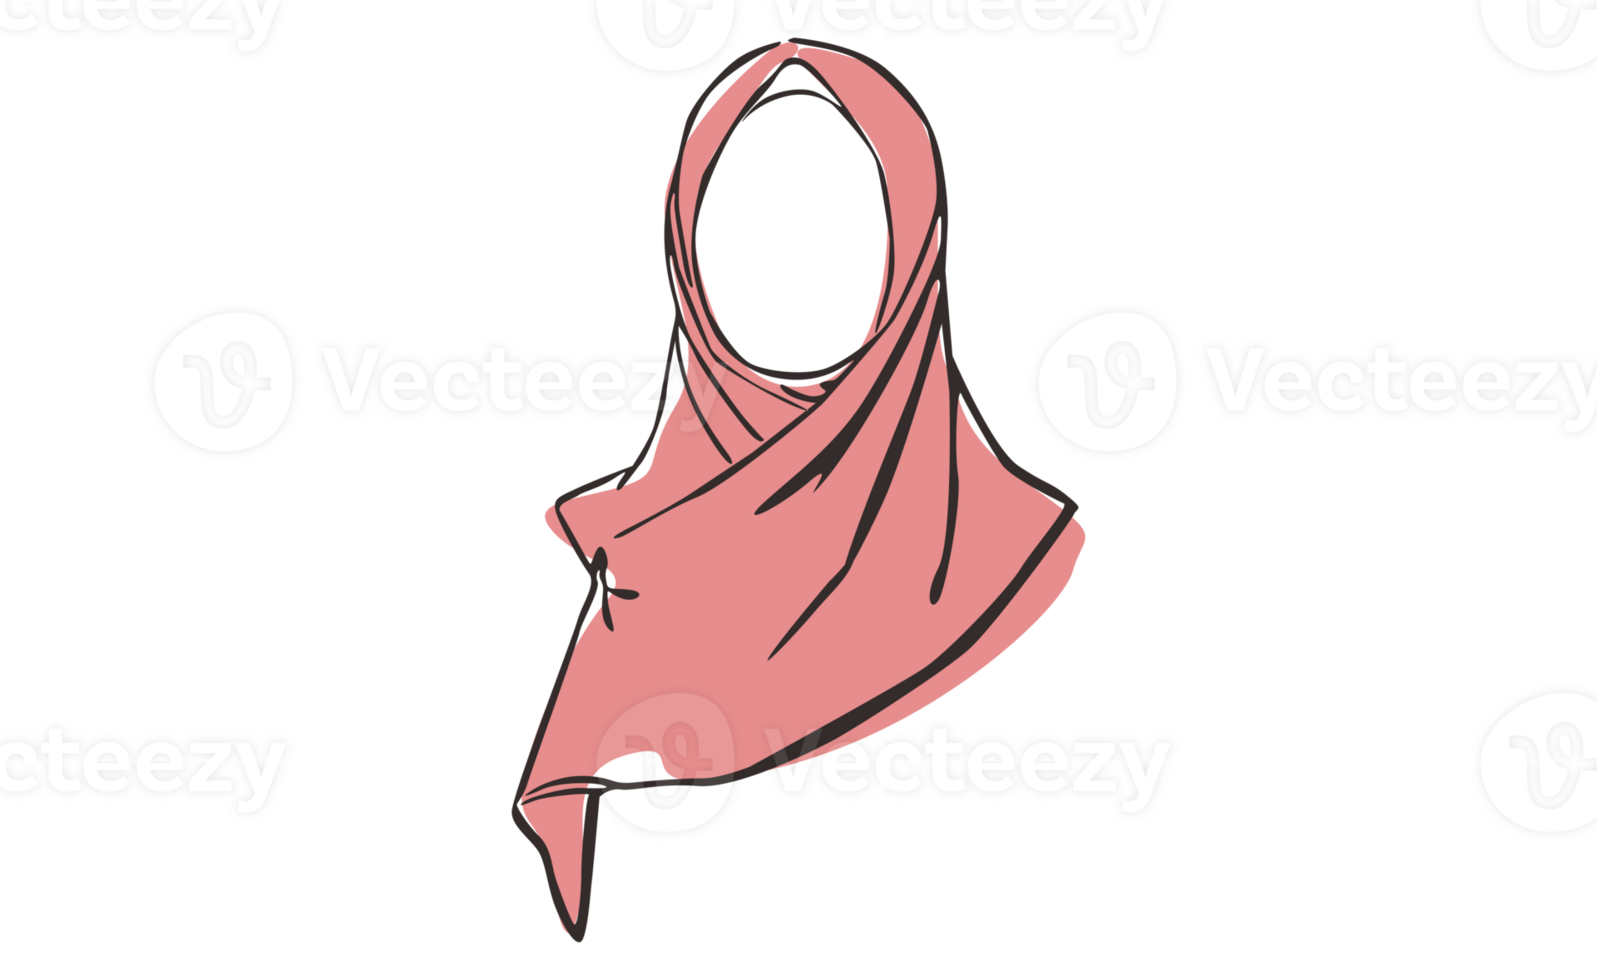 Islamic Women's Hijab Veil Line Art With Transparent Background png